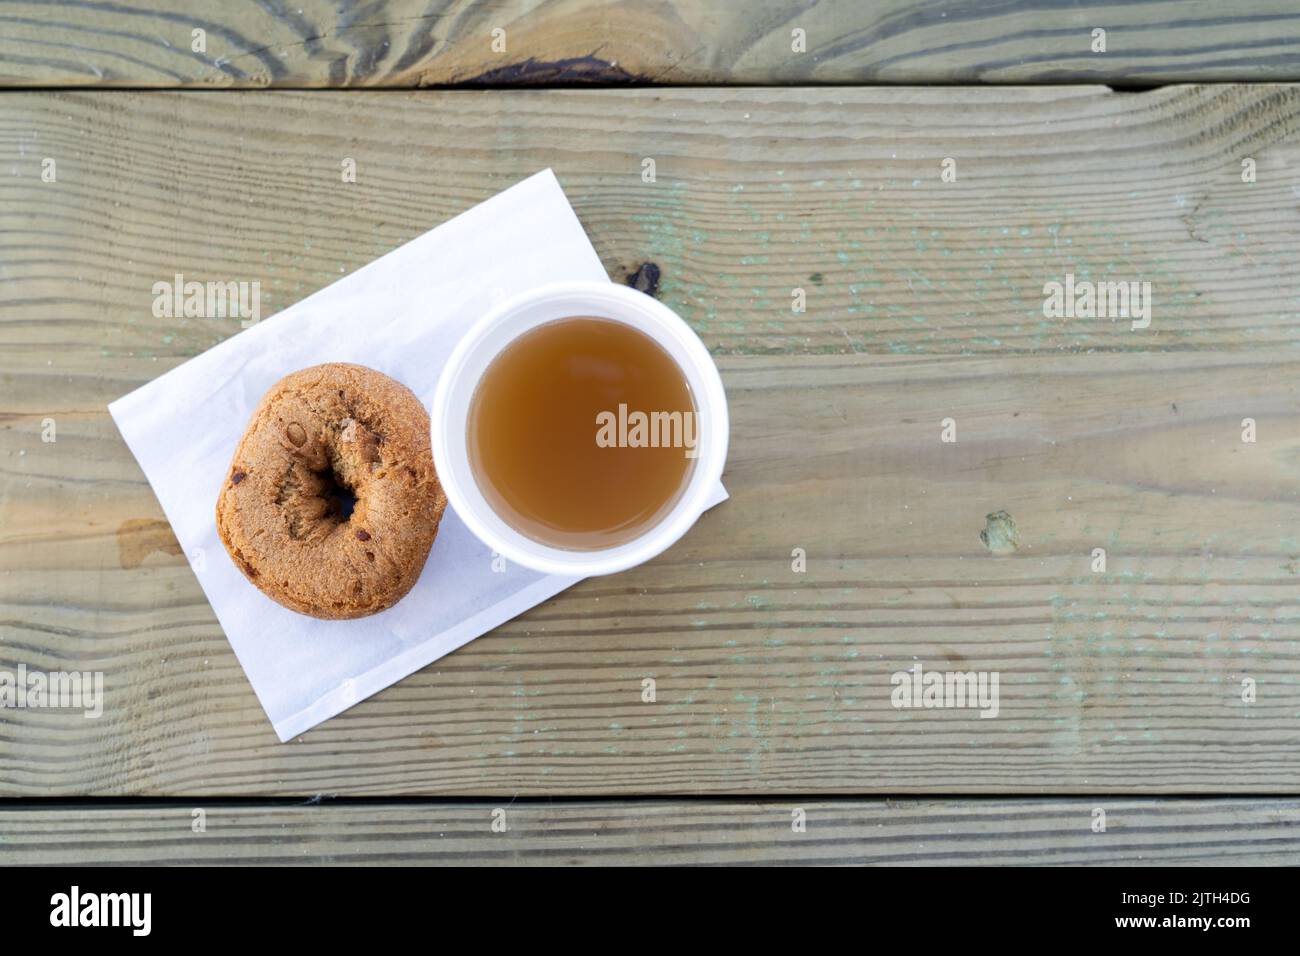 Cup of apple cider and a cinnamon donut Stock Photo